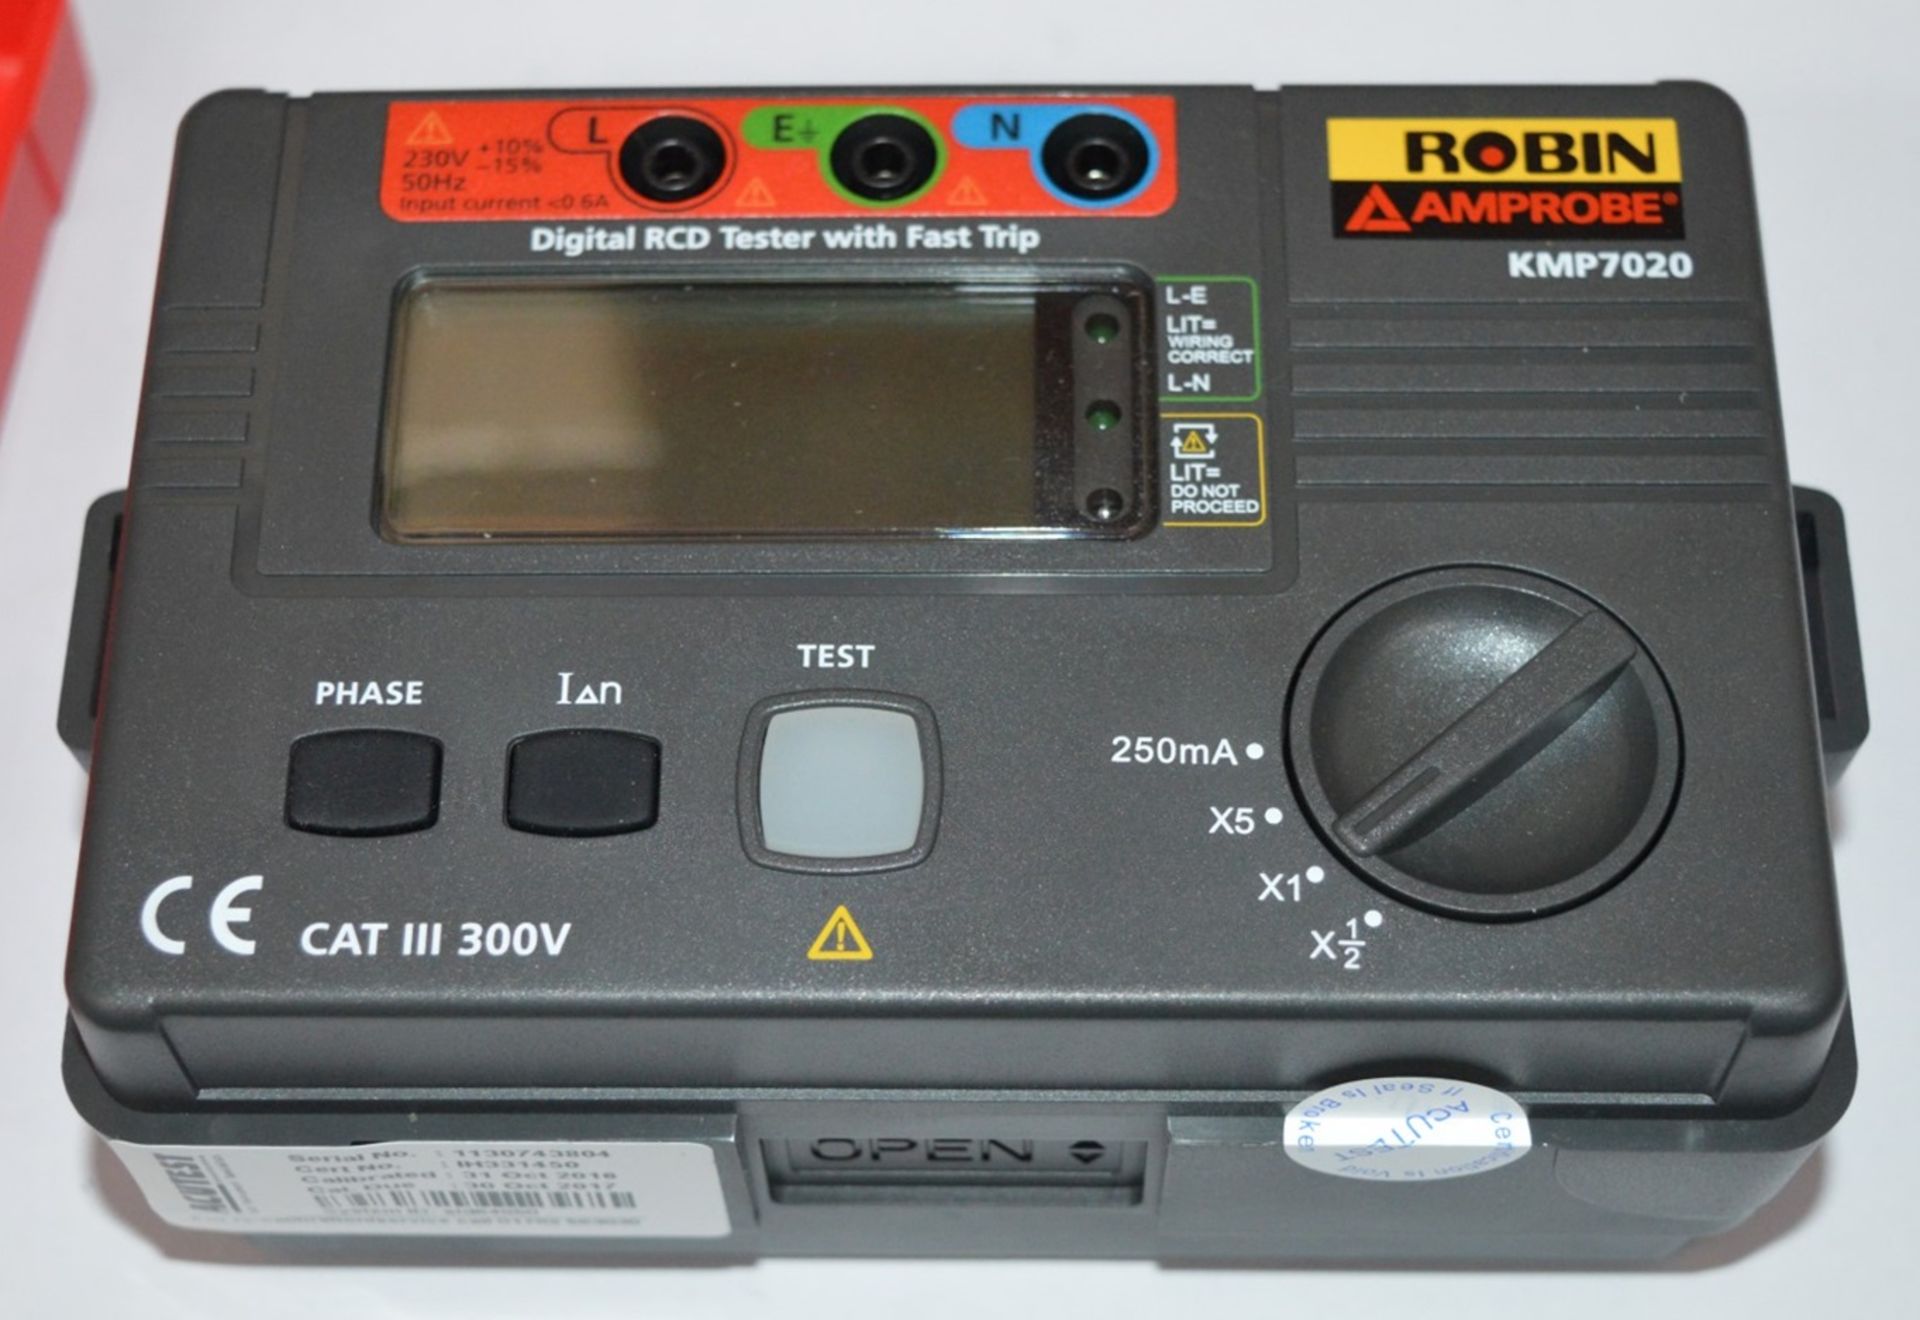 1 x Robin Amprobe Digital RCD Tester Wth Fast Trip - Model KMP7020 - Boxed With All Accessories - - Image 12 of 12